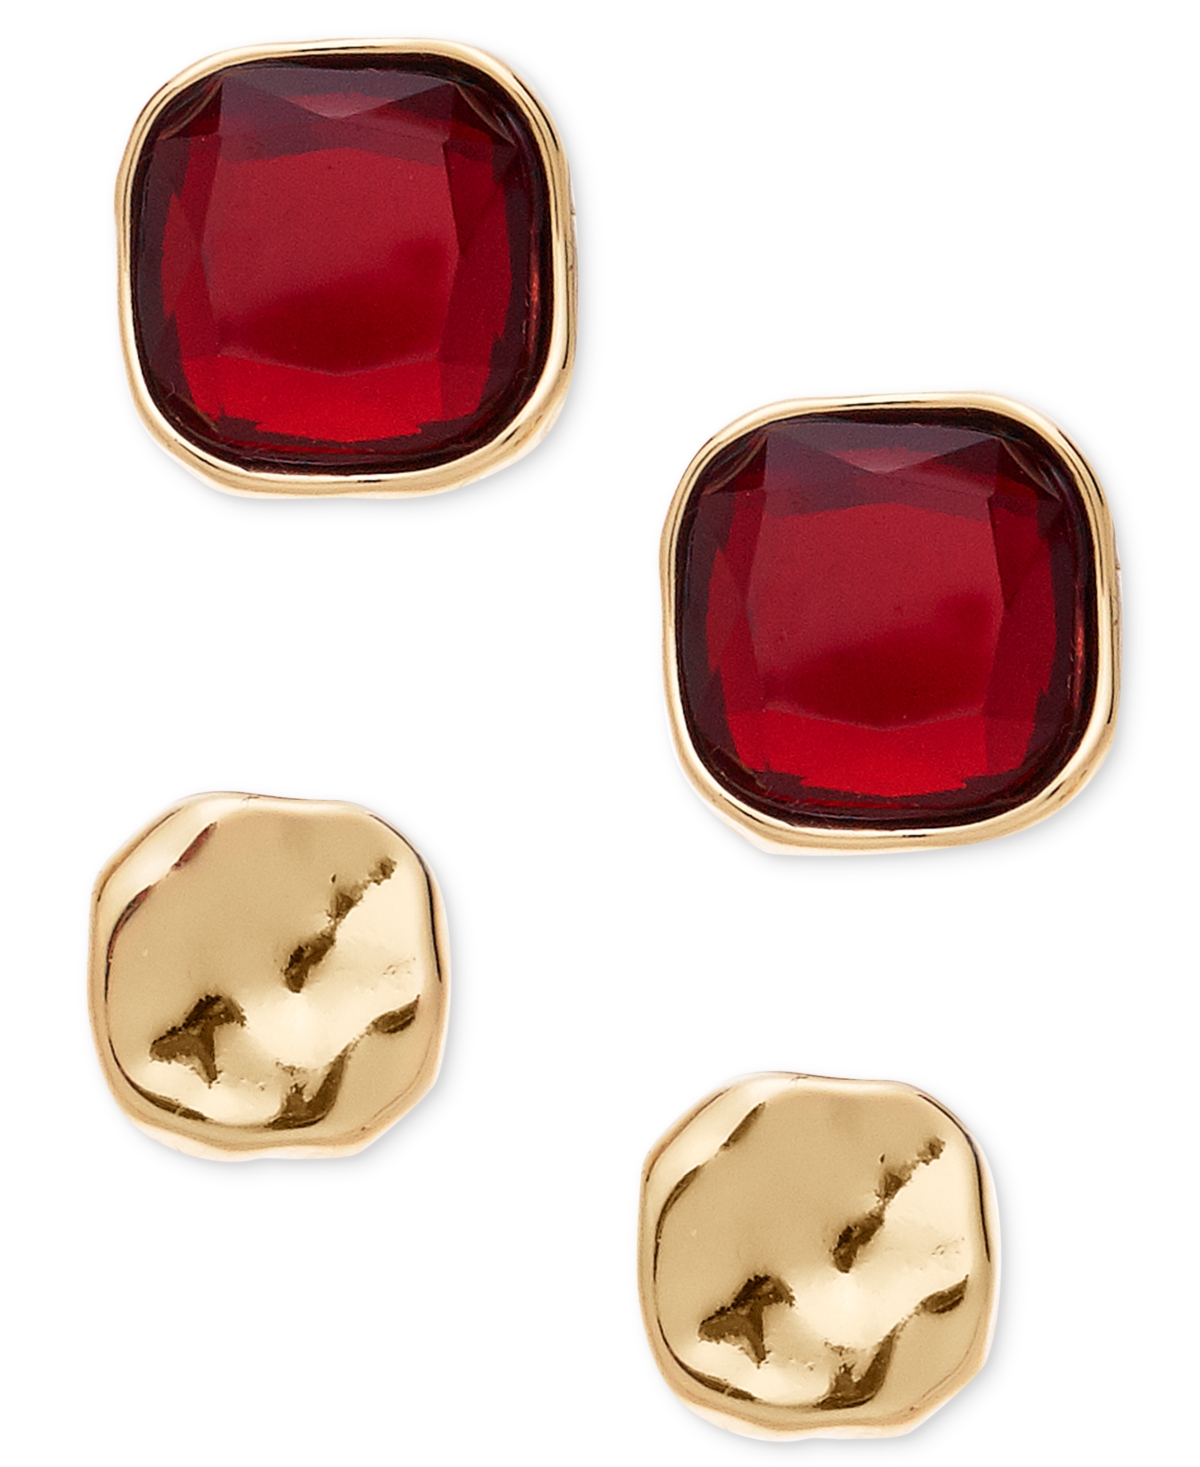 2-Pc. Set Colored Stone Square Stud Earrings, Created for Macy's - Red